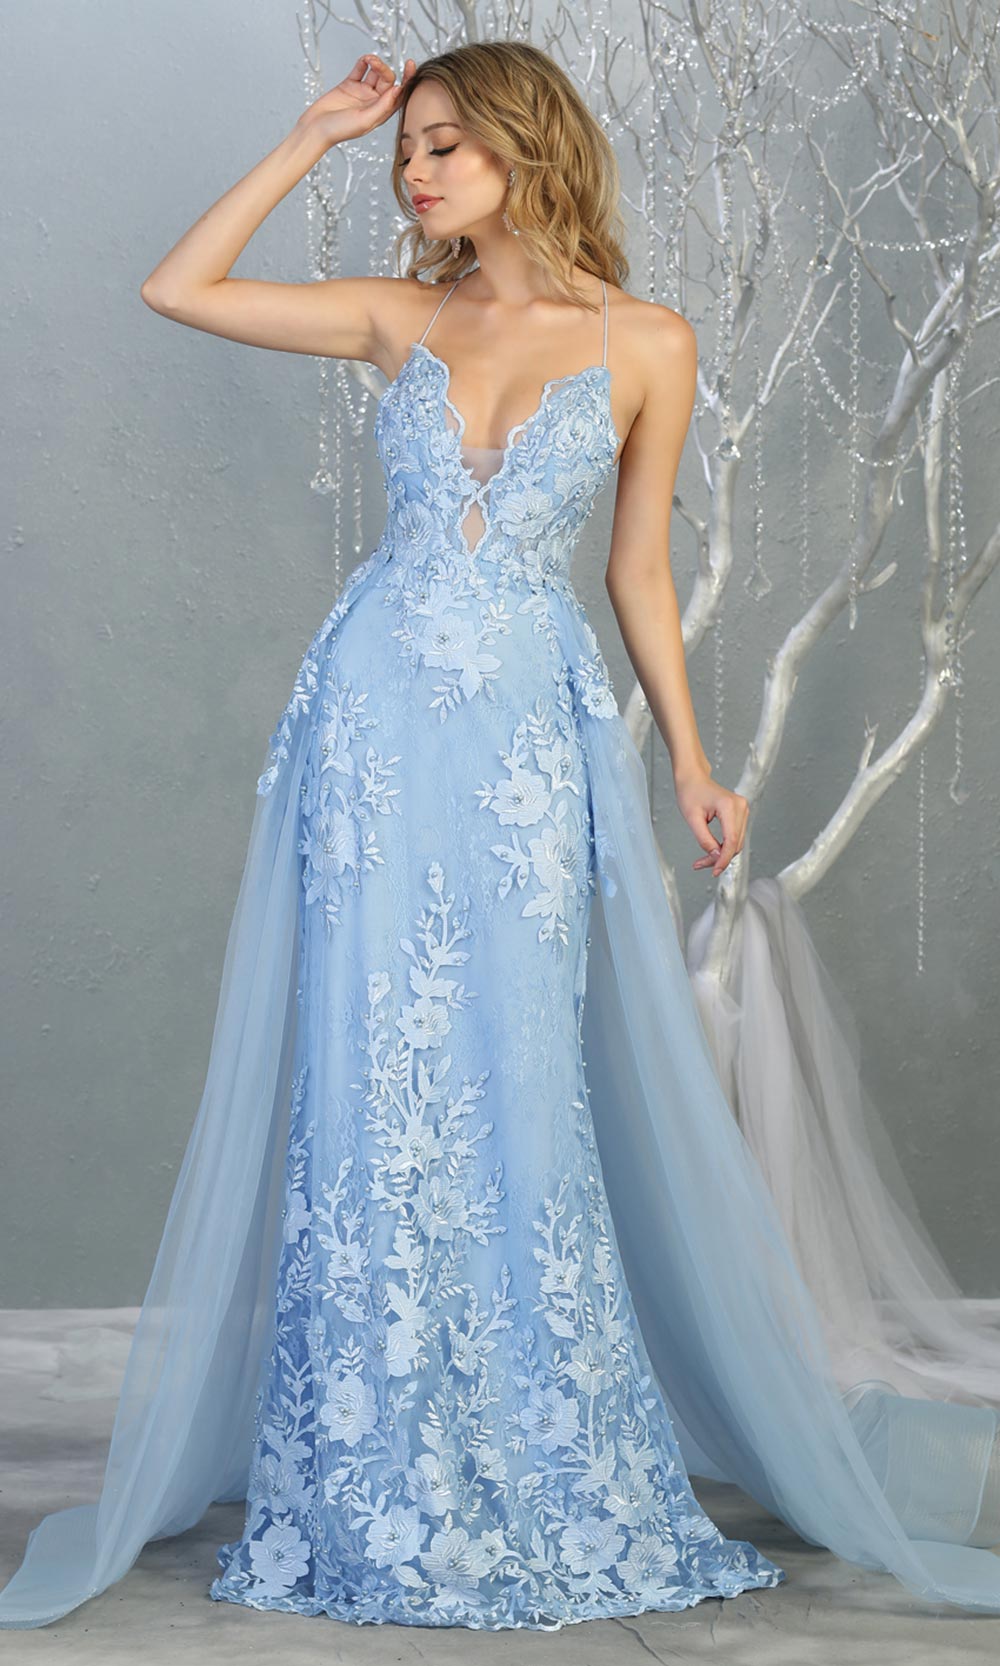 Mayqueen RQ7823 long perry blue v neck evening fitted lace dress w/straps. Full length light blue gown is perfect for  enagagement/e-shoot dress, formal wedding guest, evening party dress, prom, engagement, wedding reception. Plus sizes avail.jpg